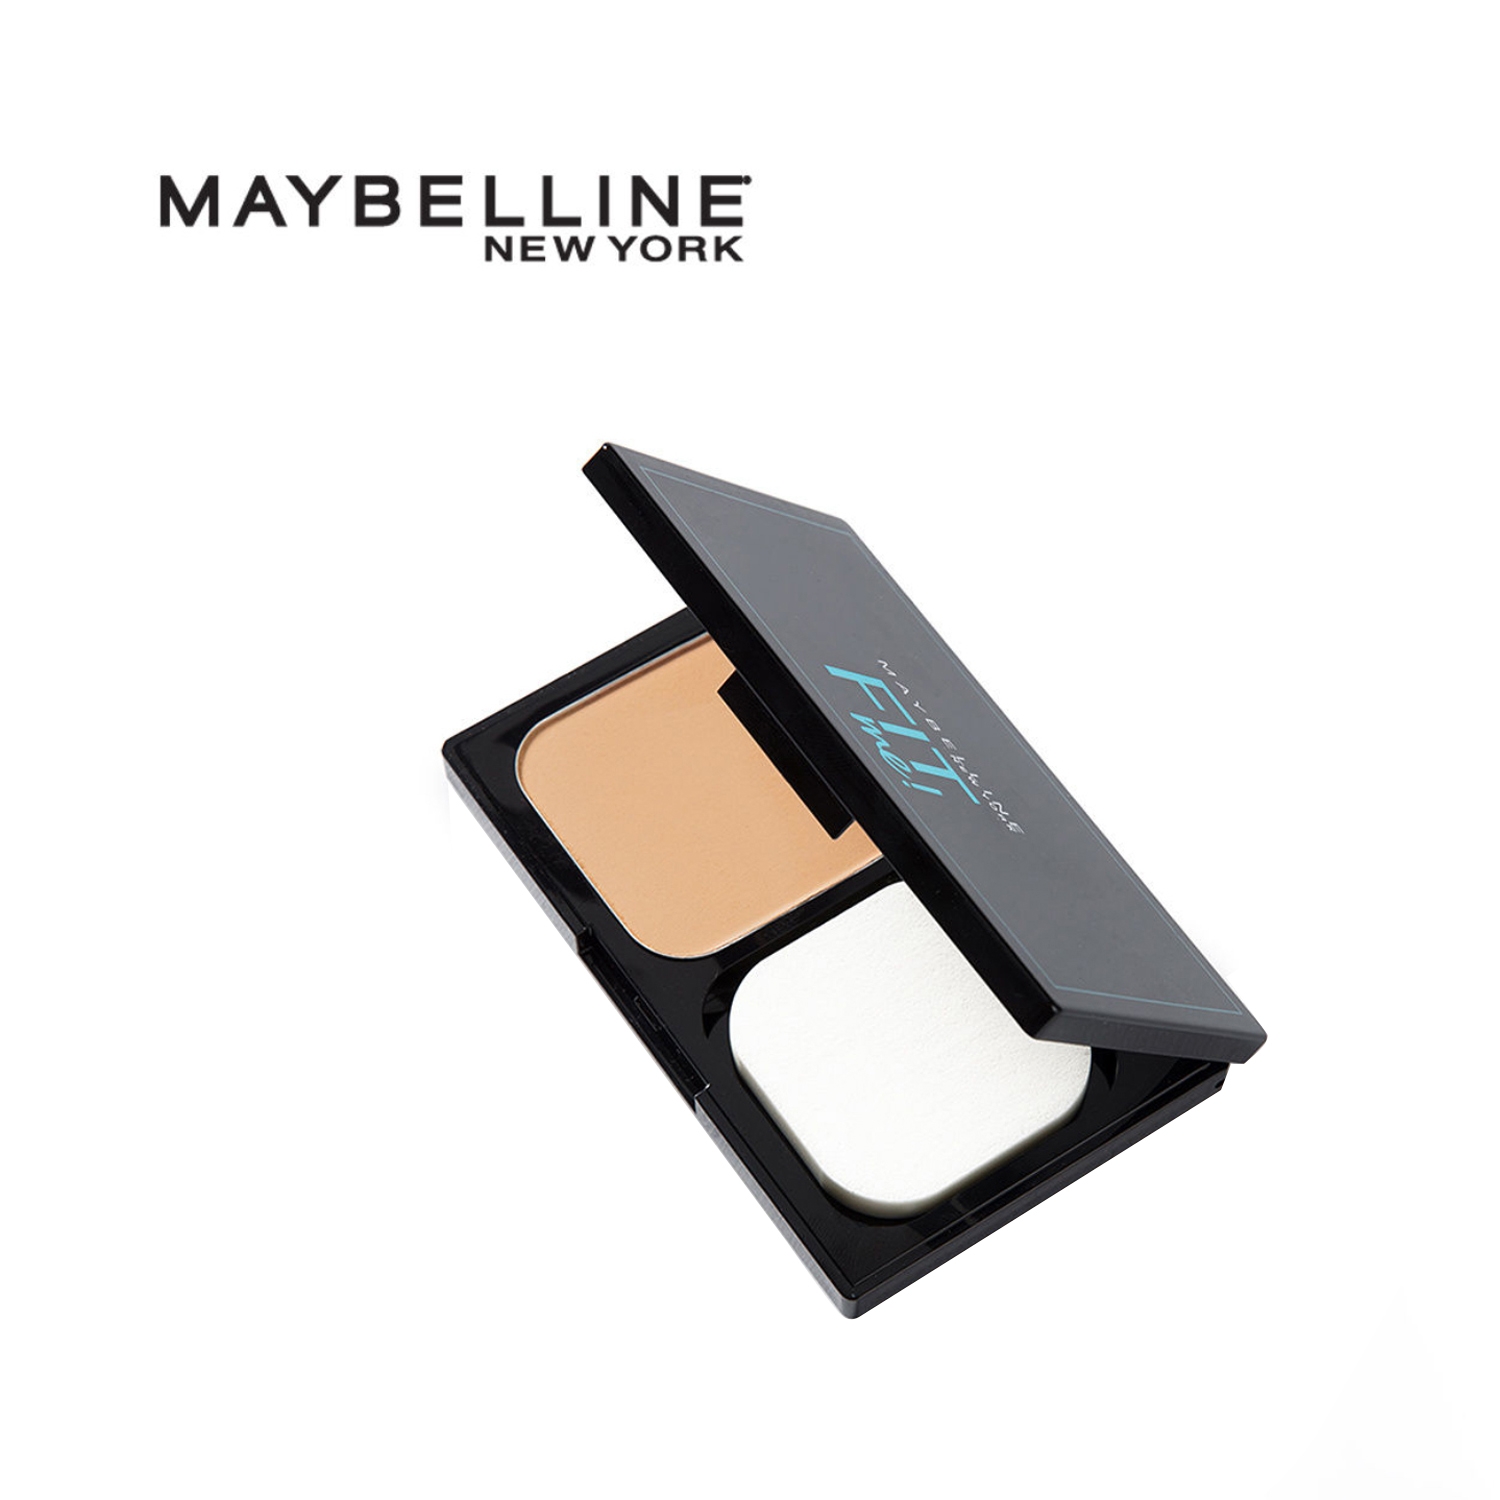 Maybelline New York | Maybelline New York Fit Me Two Way Cake Powder Foundation SPF 32 - 235 Pure Beige (9g)